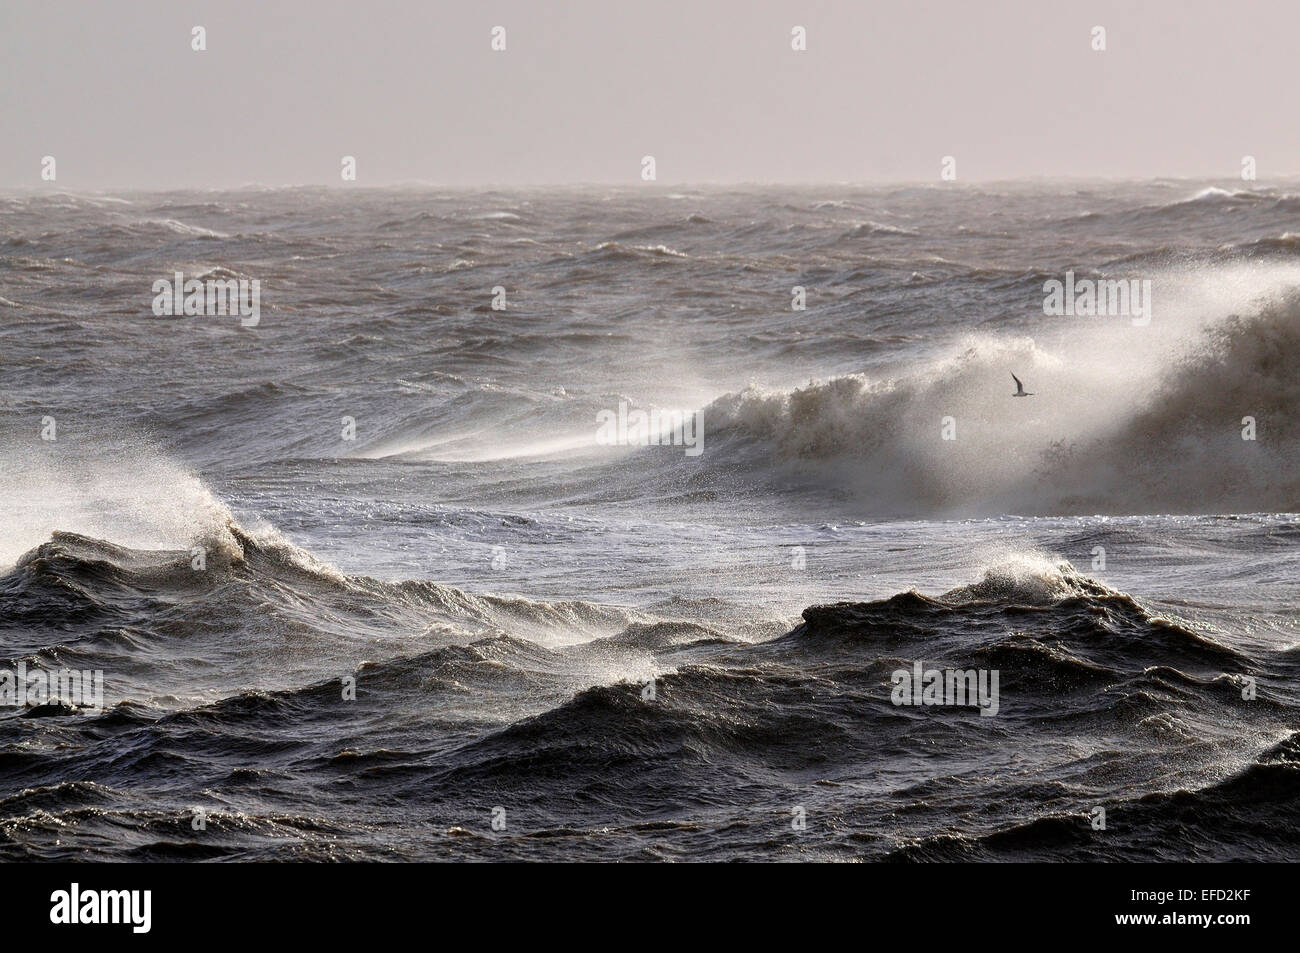 Rough sea with large waves and spray UK Stock Photo